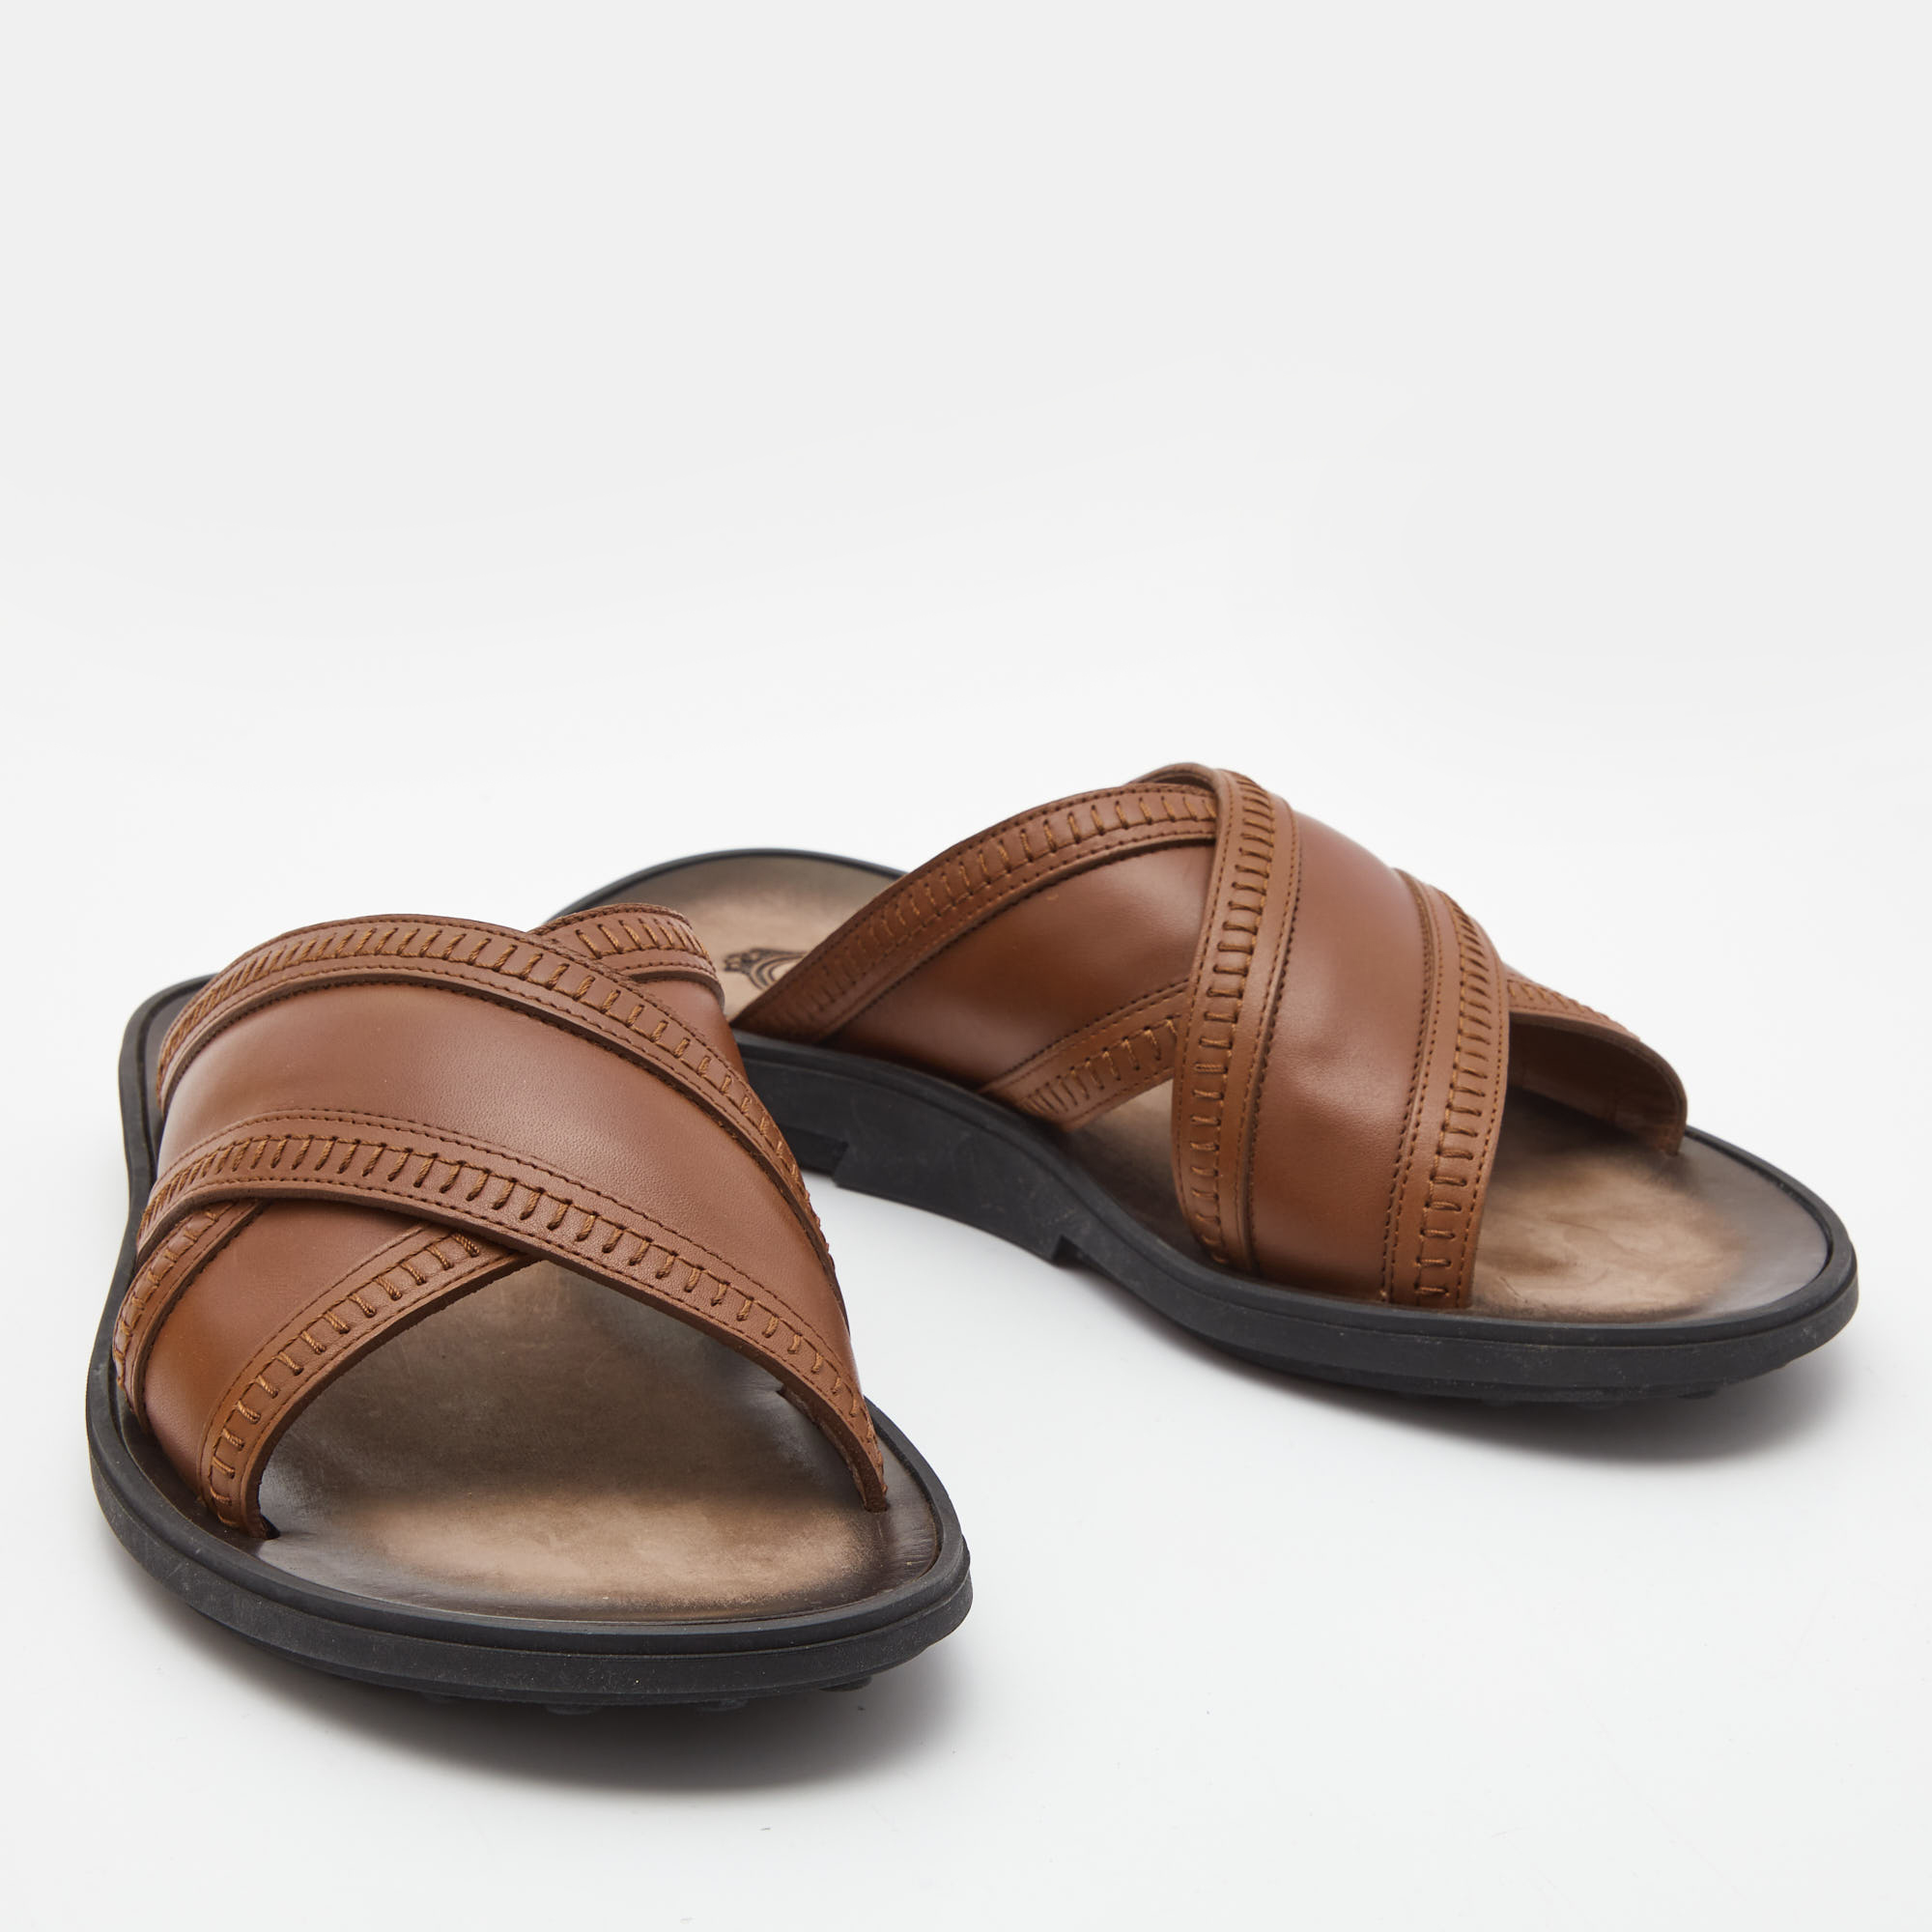 Tod's Brown Leather Cross Strap Flat Sandals Size 40